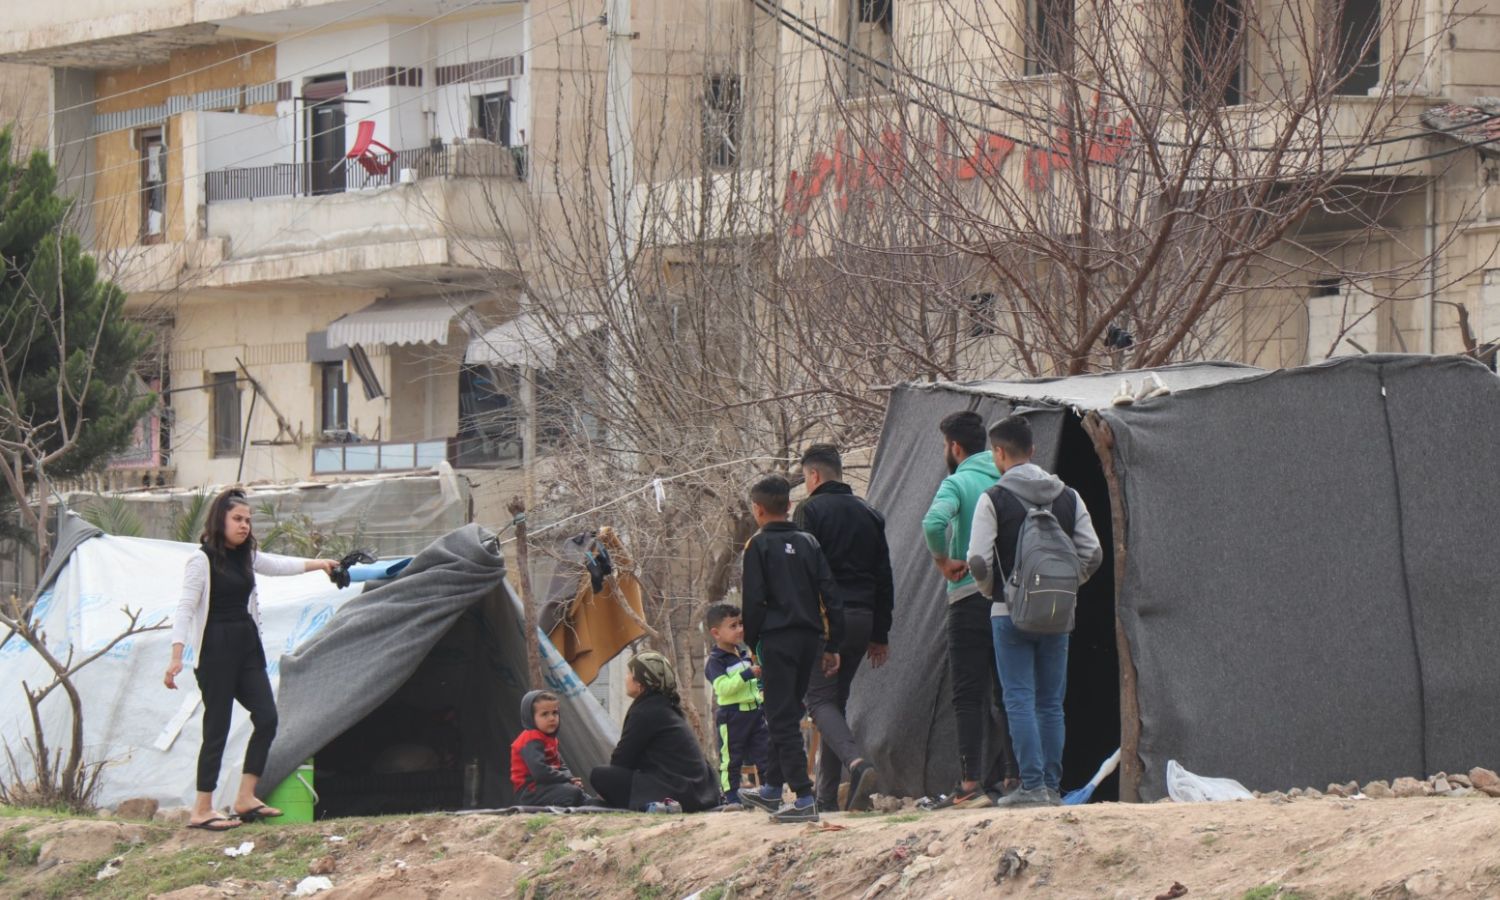 Tents set up by residents of Sheikh Maqsoud neighborhood, northeast of Aleppo, for those affected by the earthquake - March 4, 2023 (Hawar News Agency)